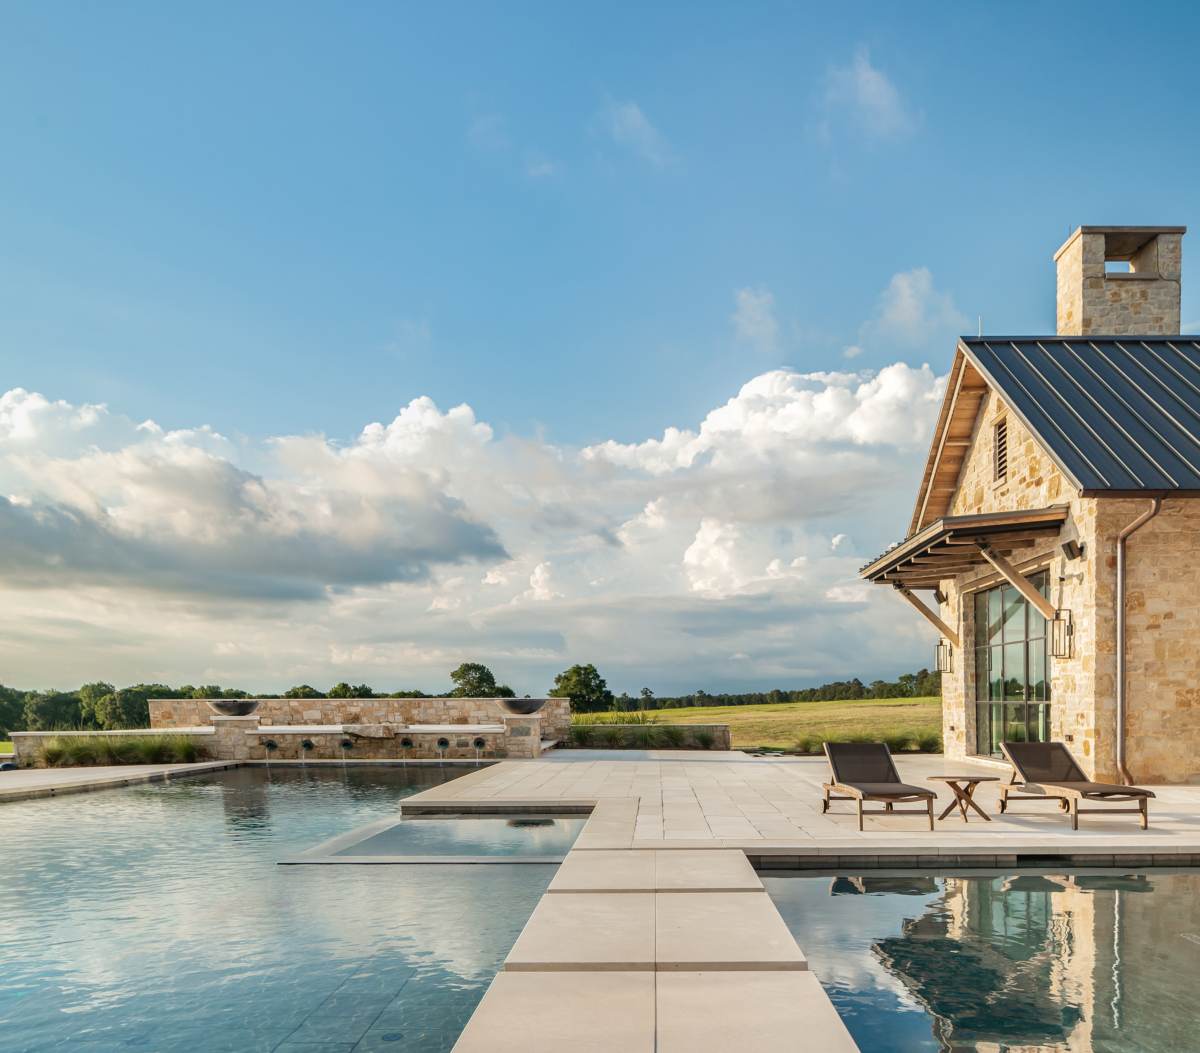 Exterior view of the pool and patio at Texas Ranch, a custom home designed and built by Farmer Payne Architects.